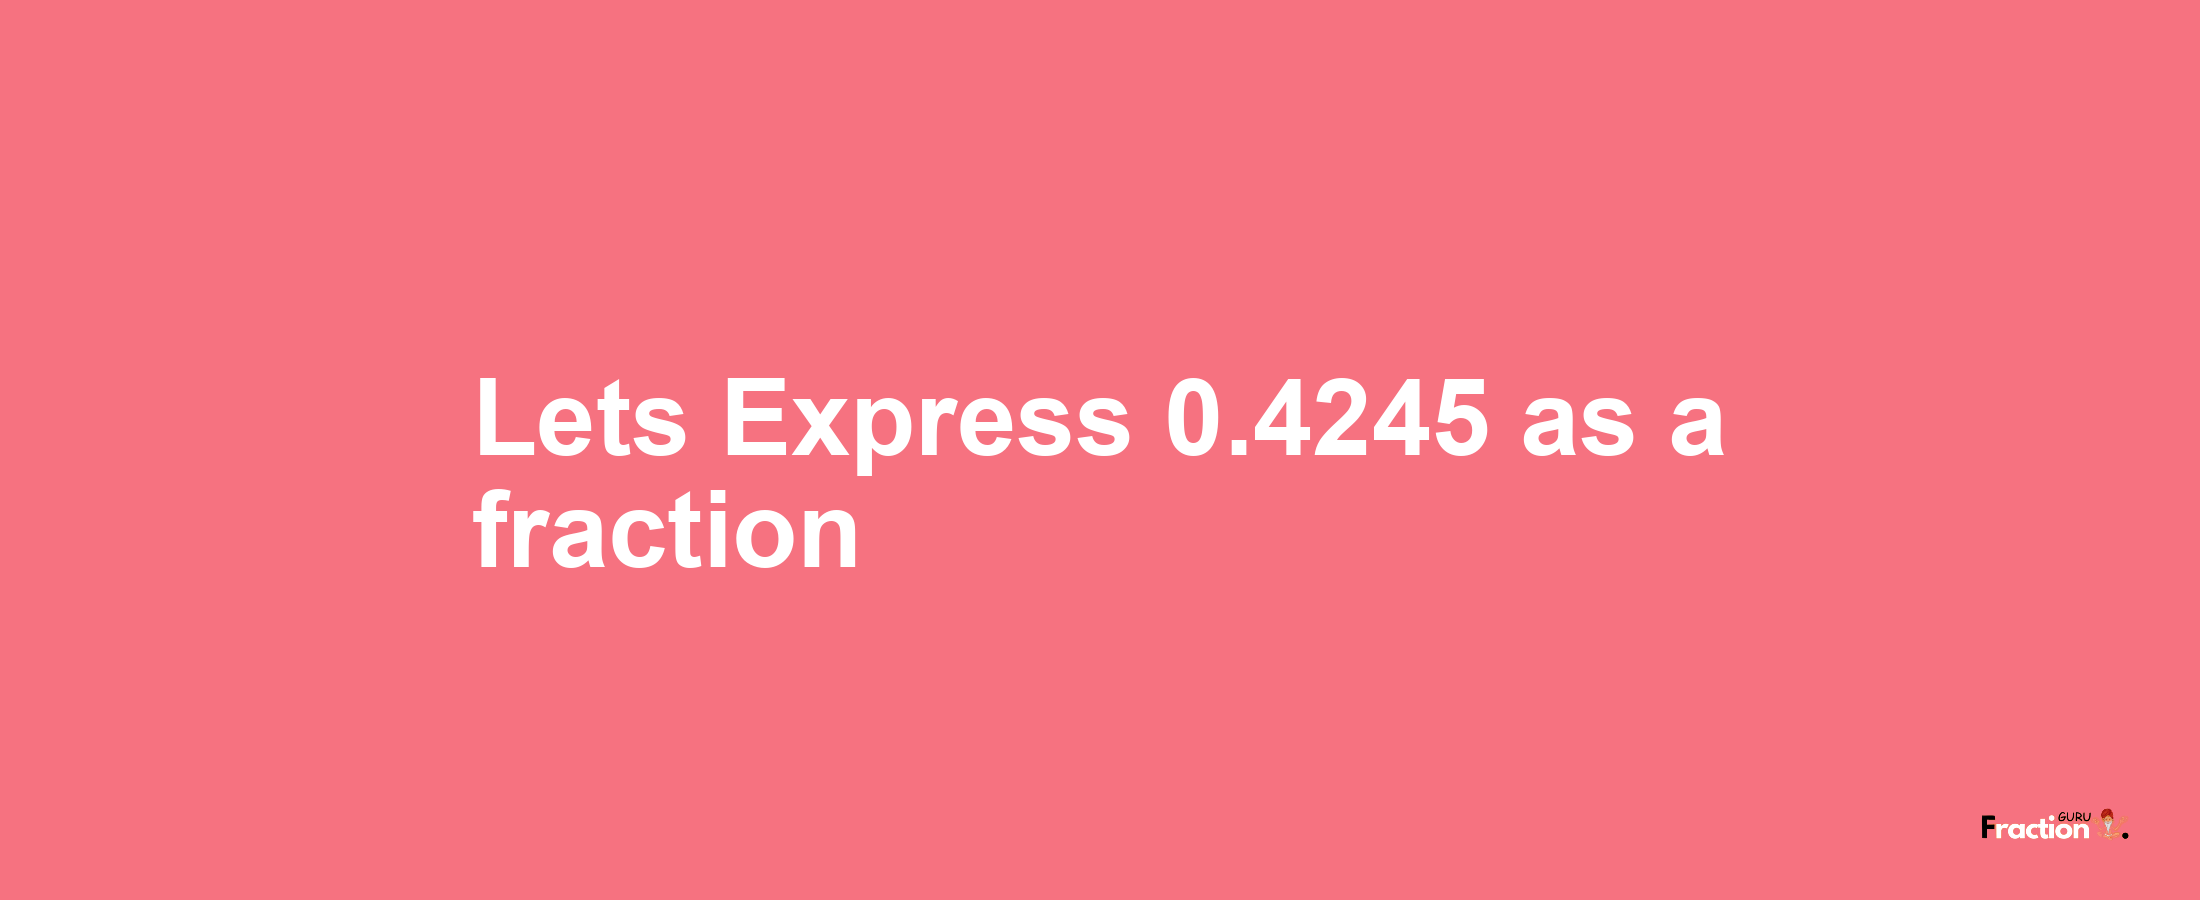 Lets Express 0.4245 as afraction